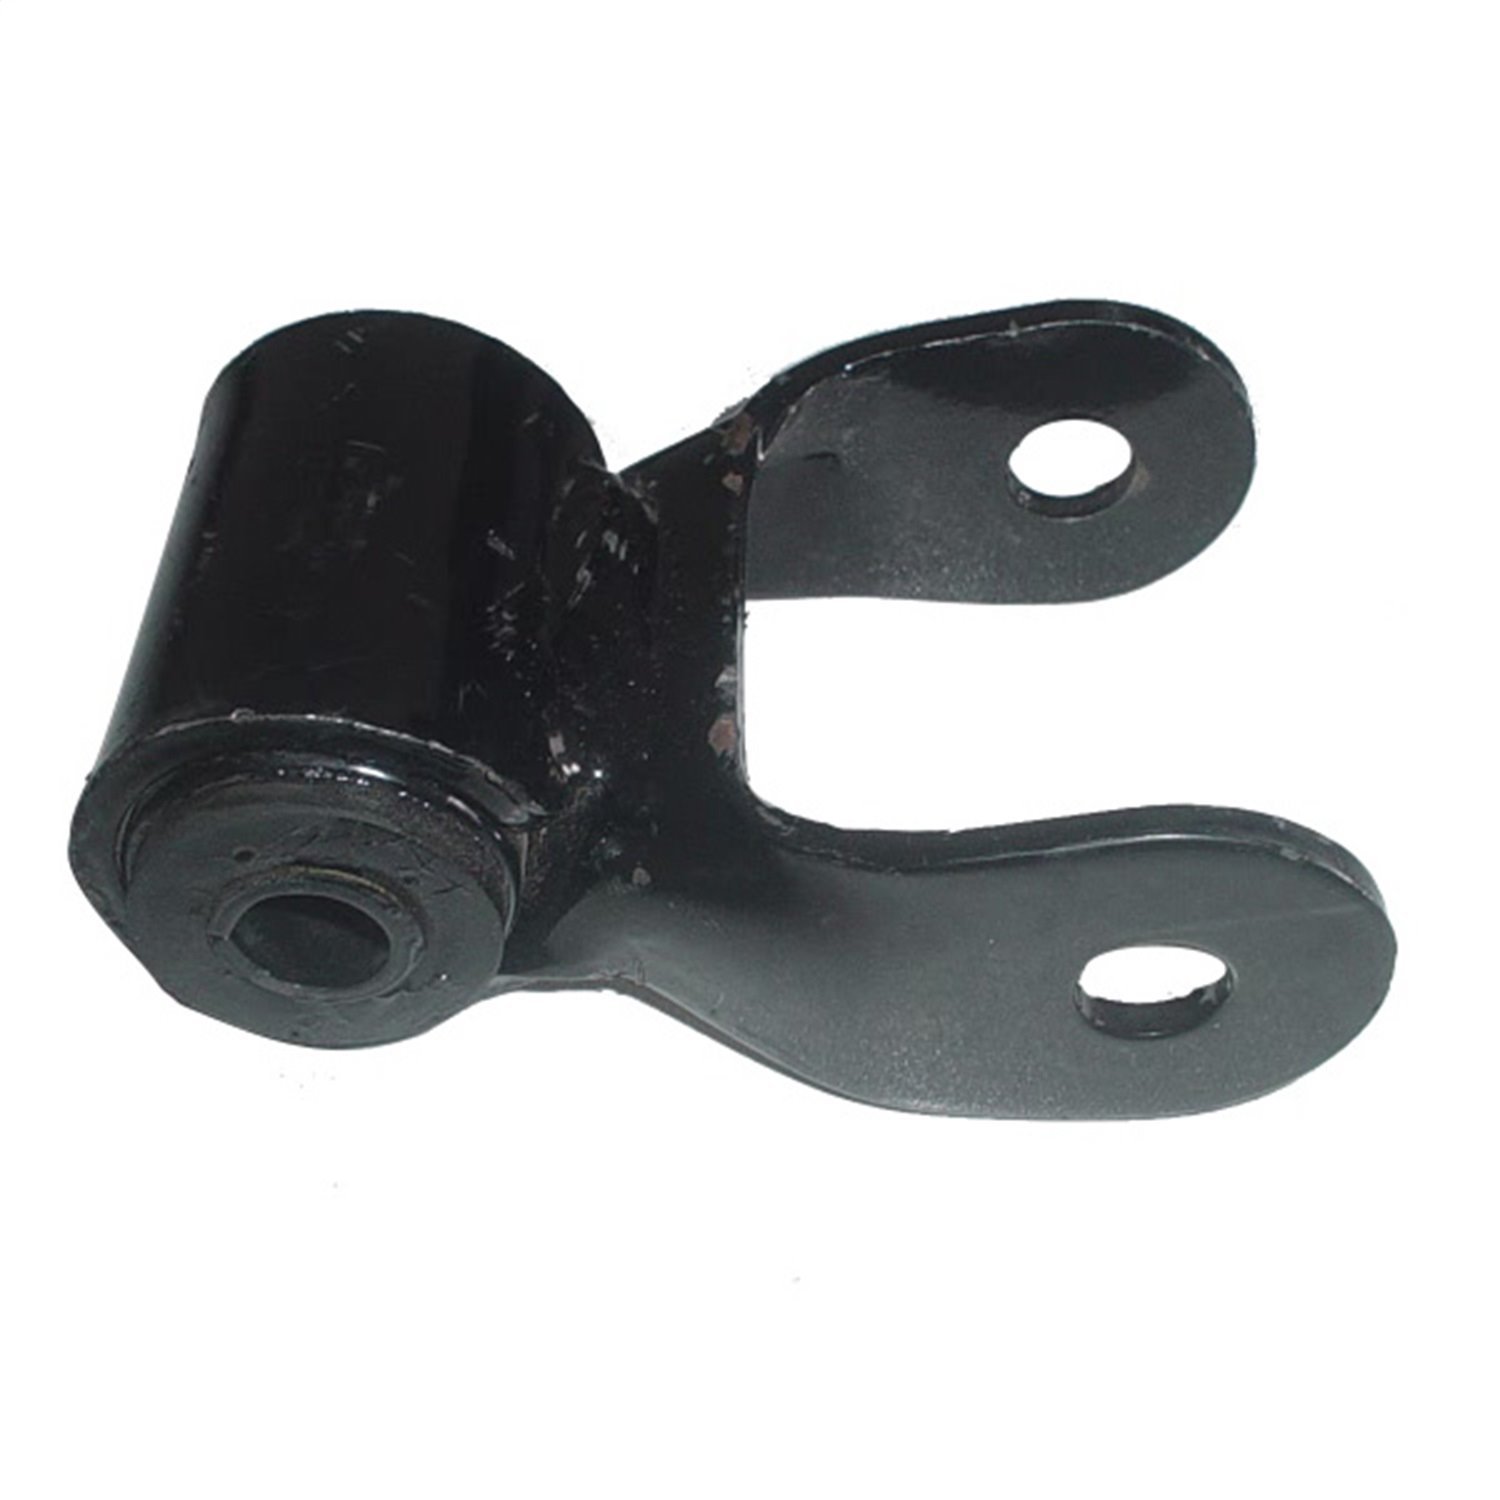 Stock replacement rear leaf spring shackle from Omix-ADA,